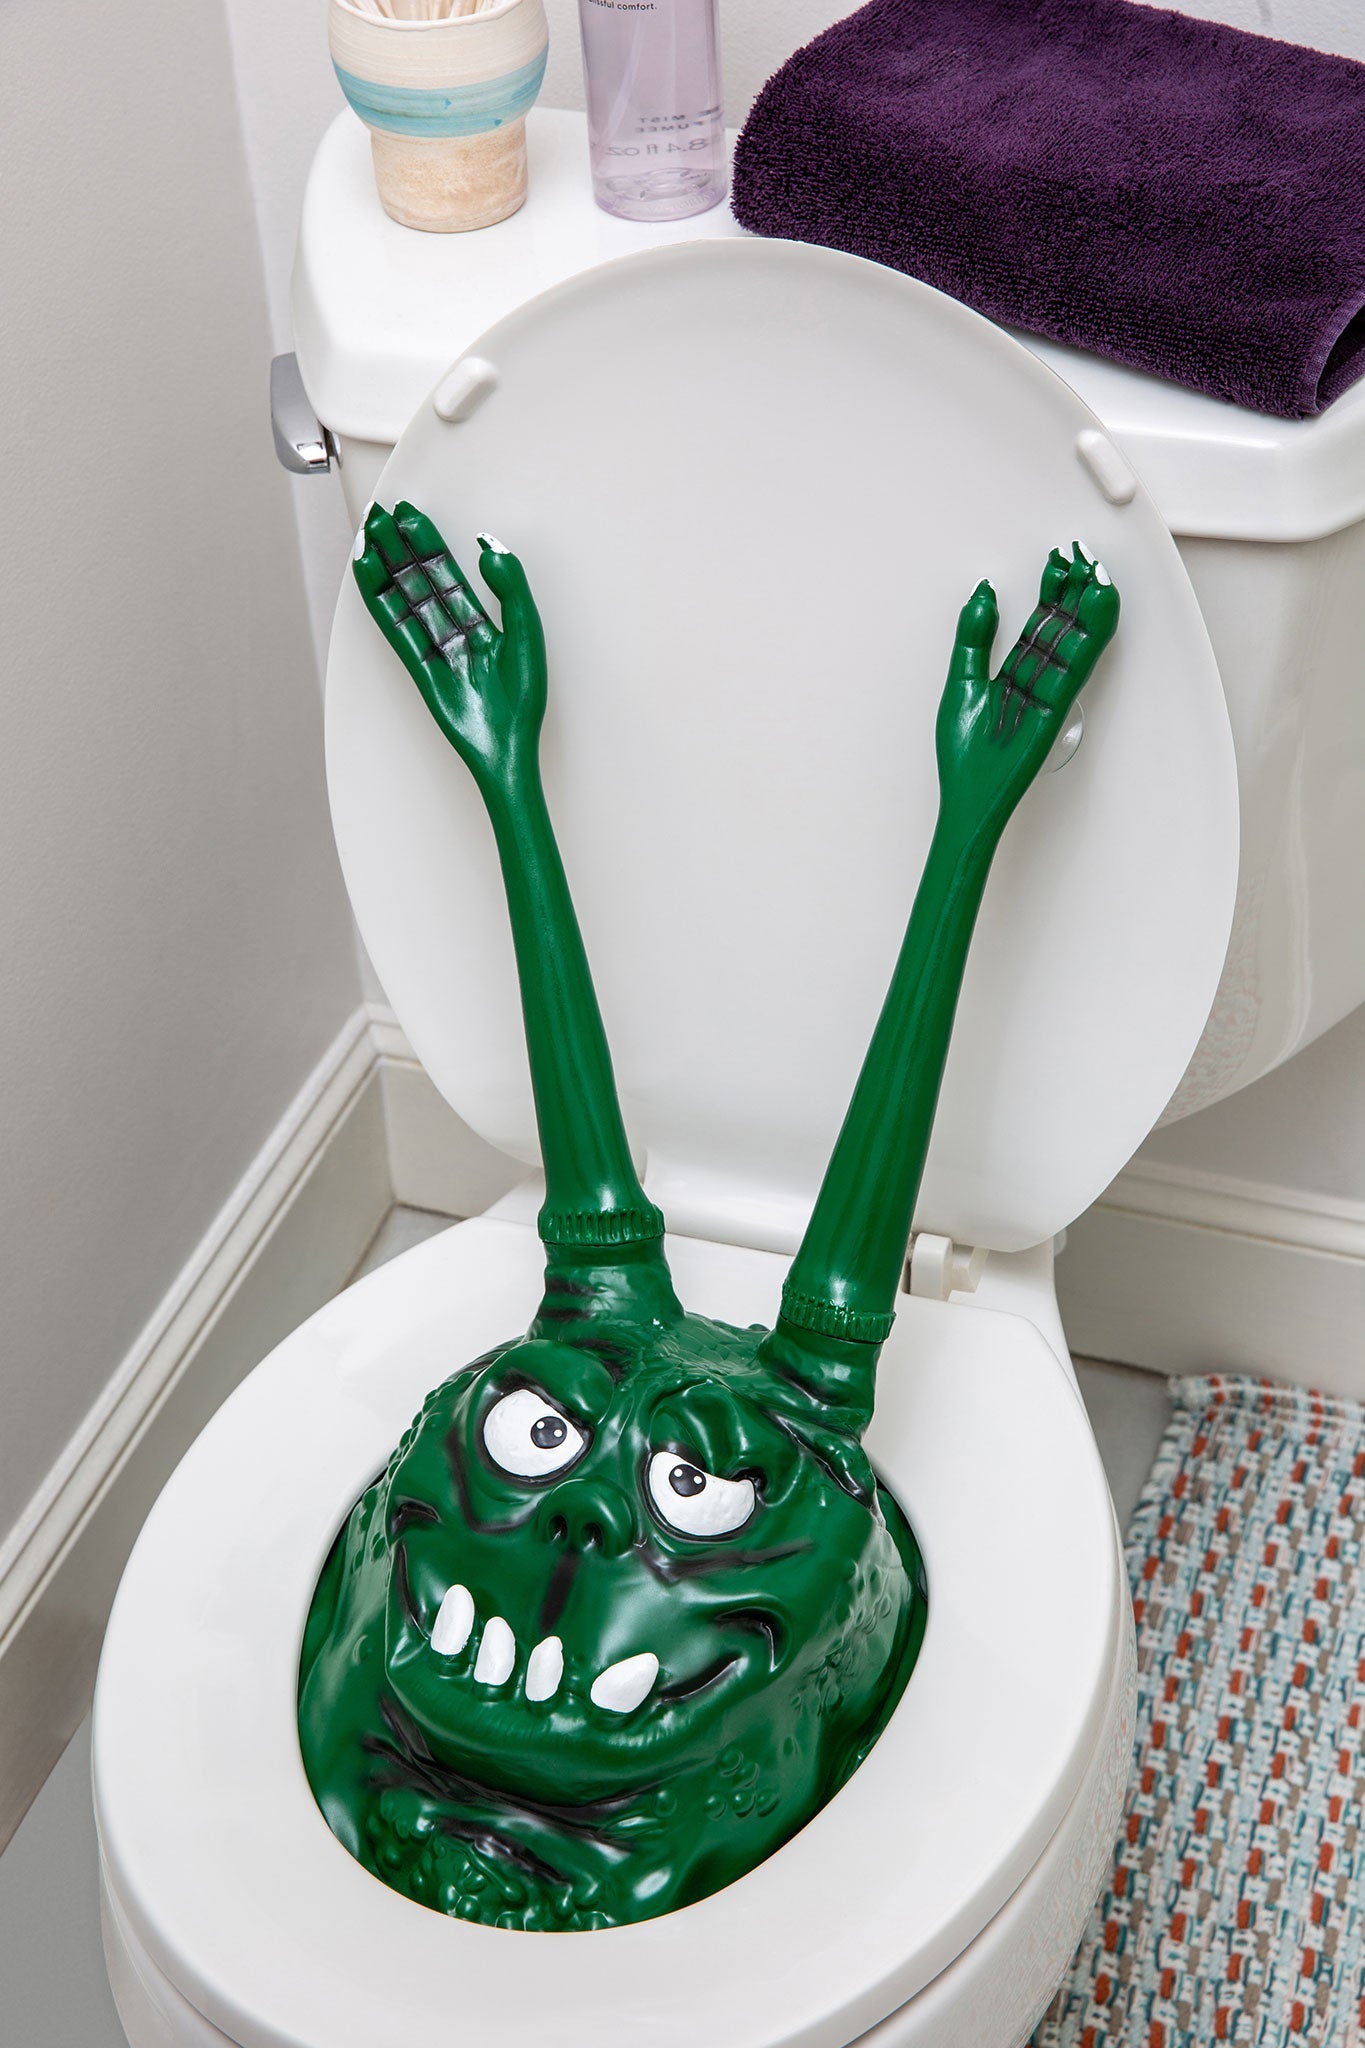 Toilet Golf – The Diabolical Gift People